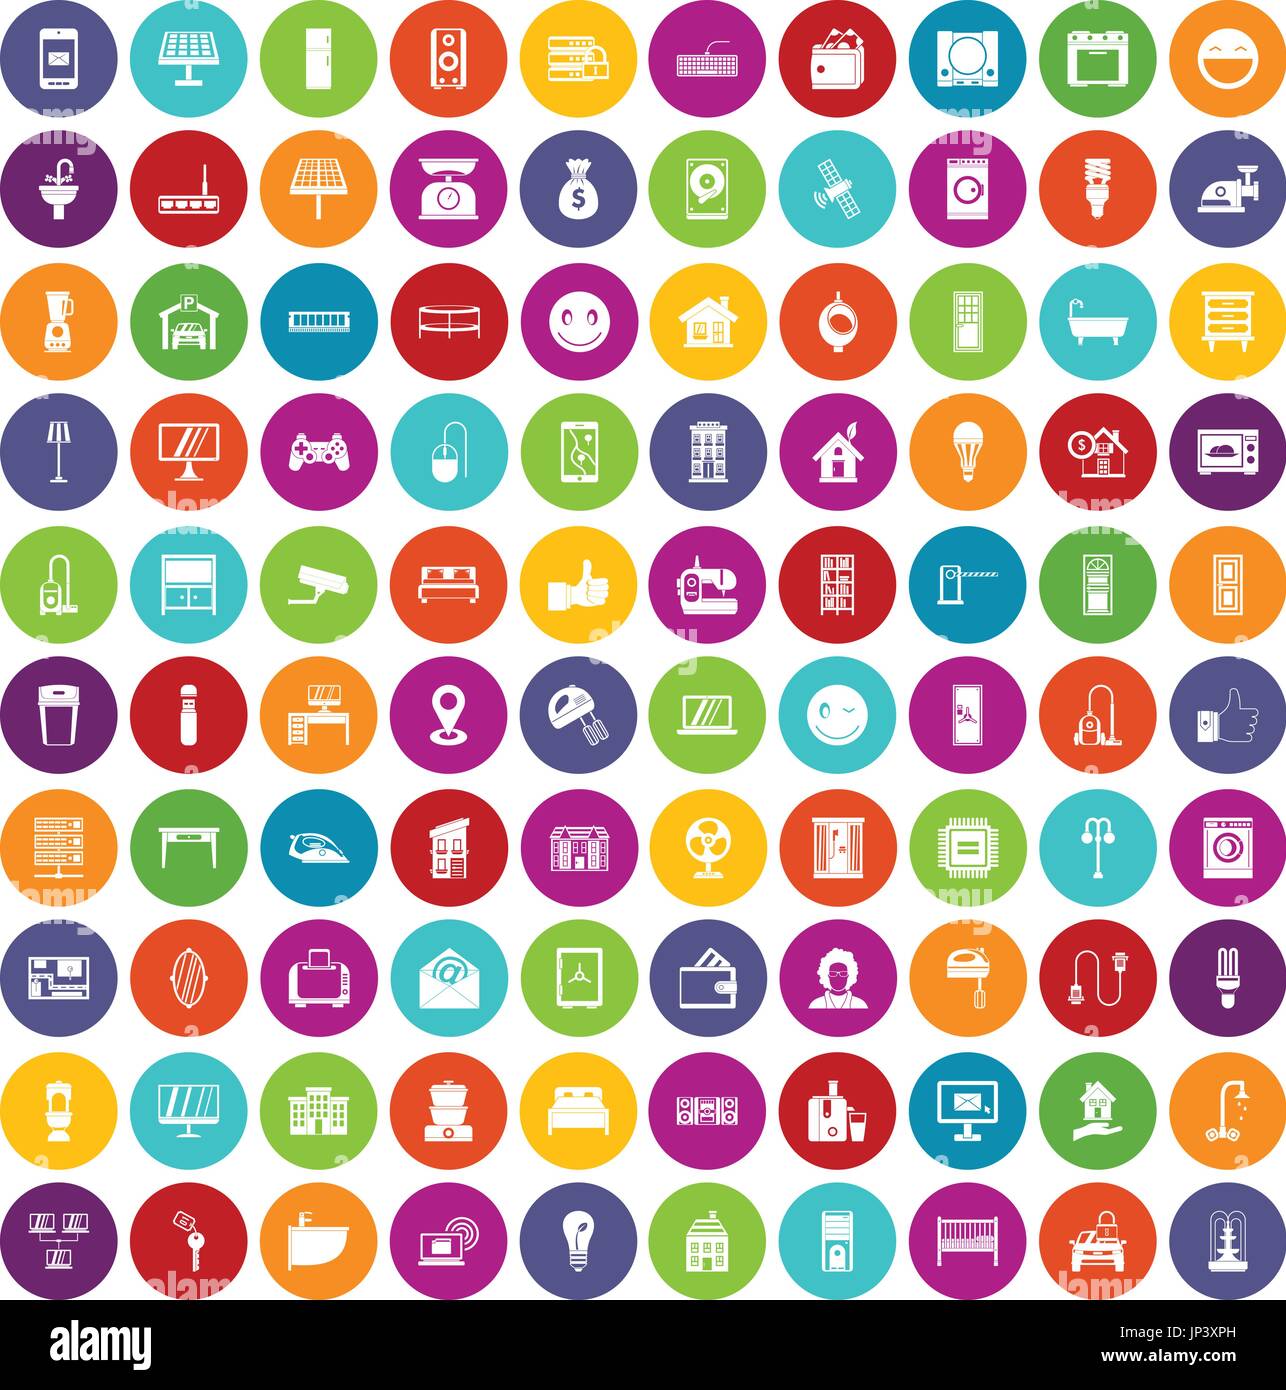 100 smart house icons set color Stock Vector